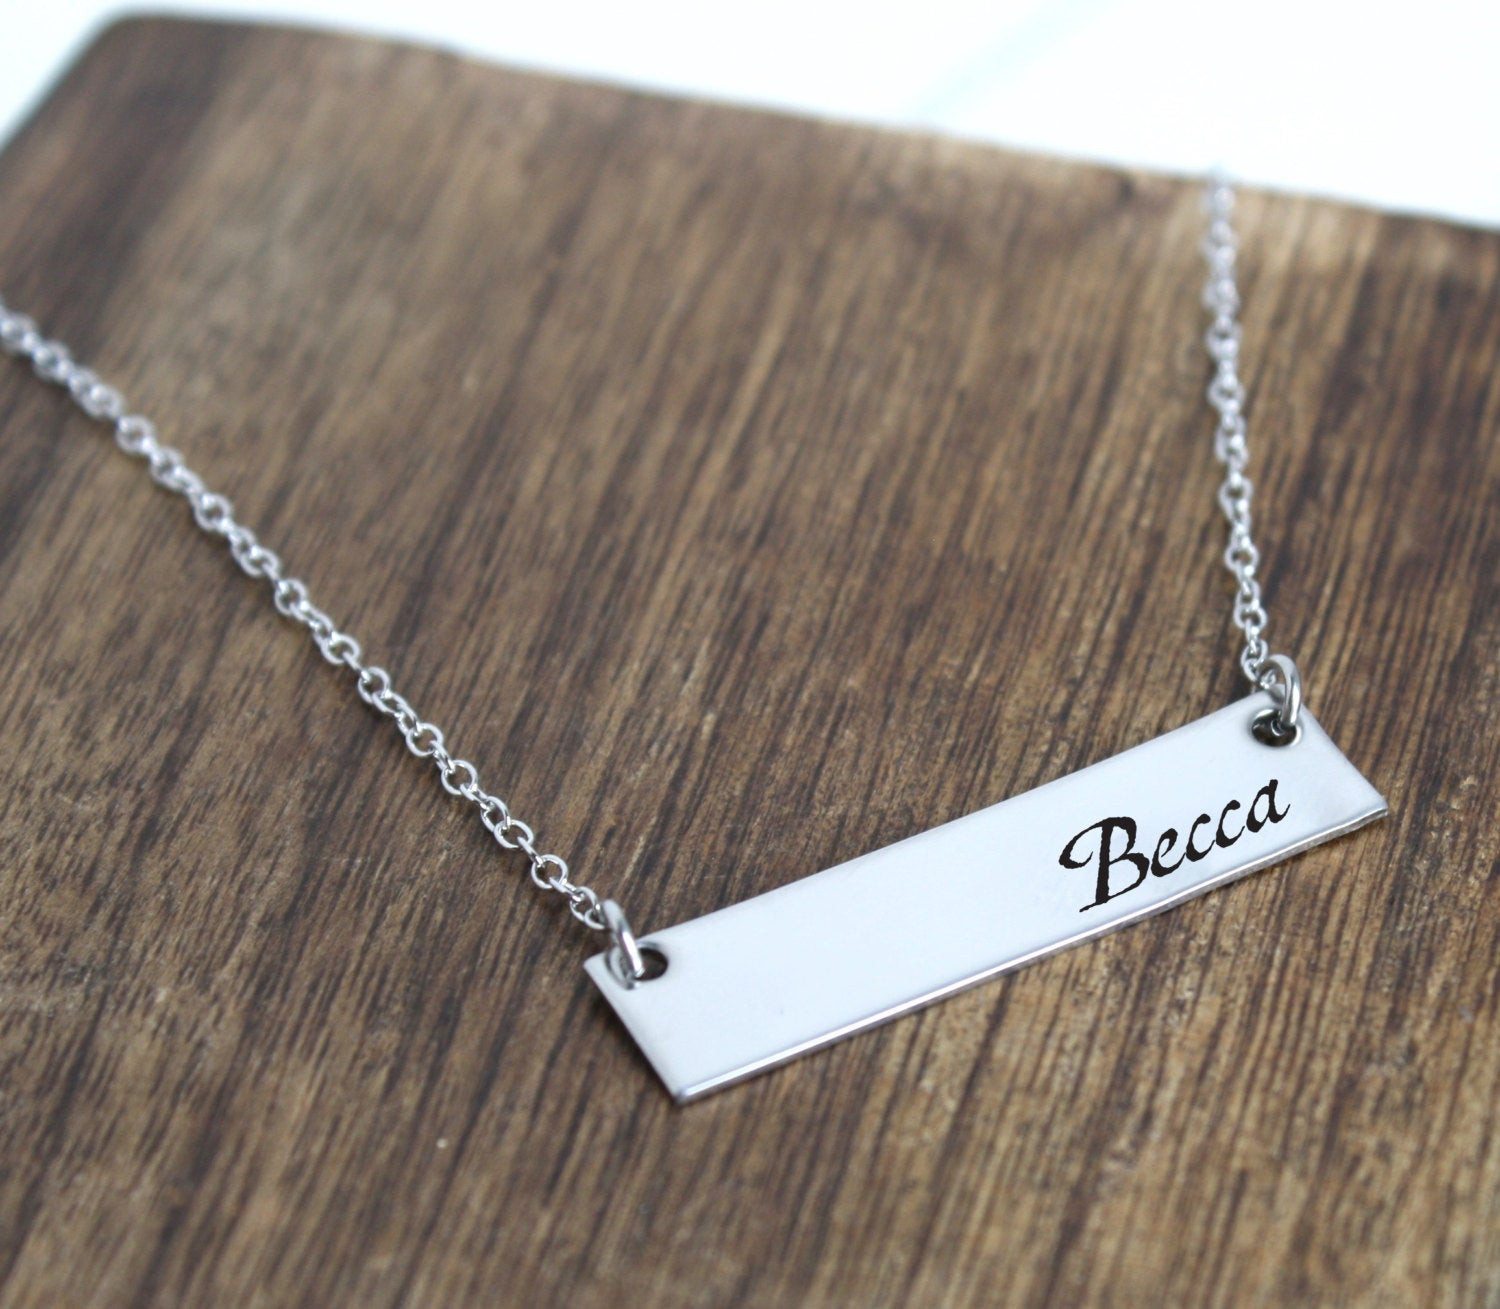 Custom Bar Necklace
 Personalized Bar Necklace Jewelry Personalize by